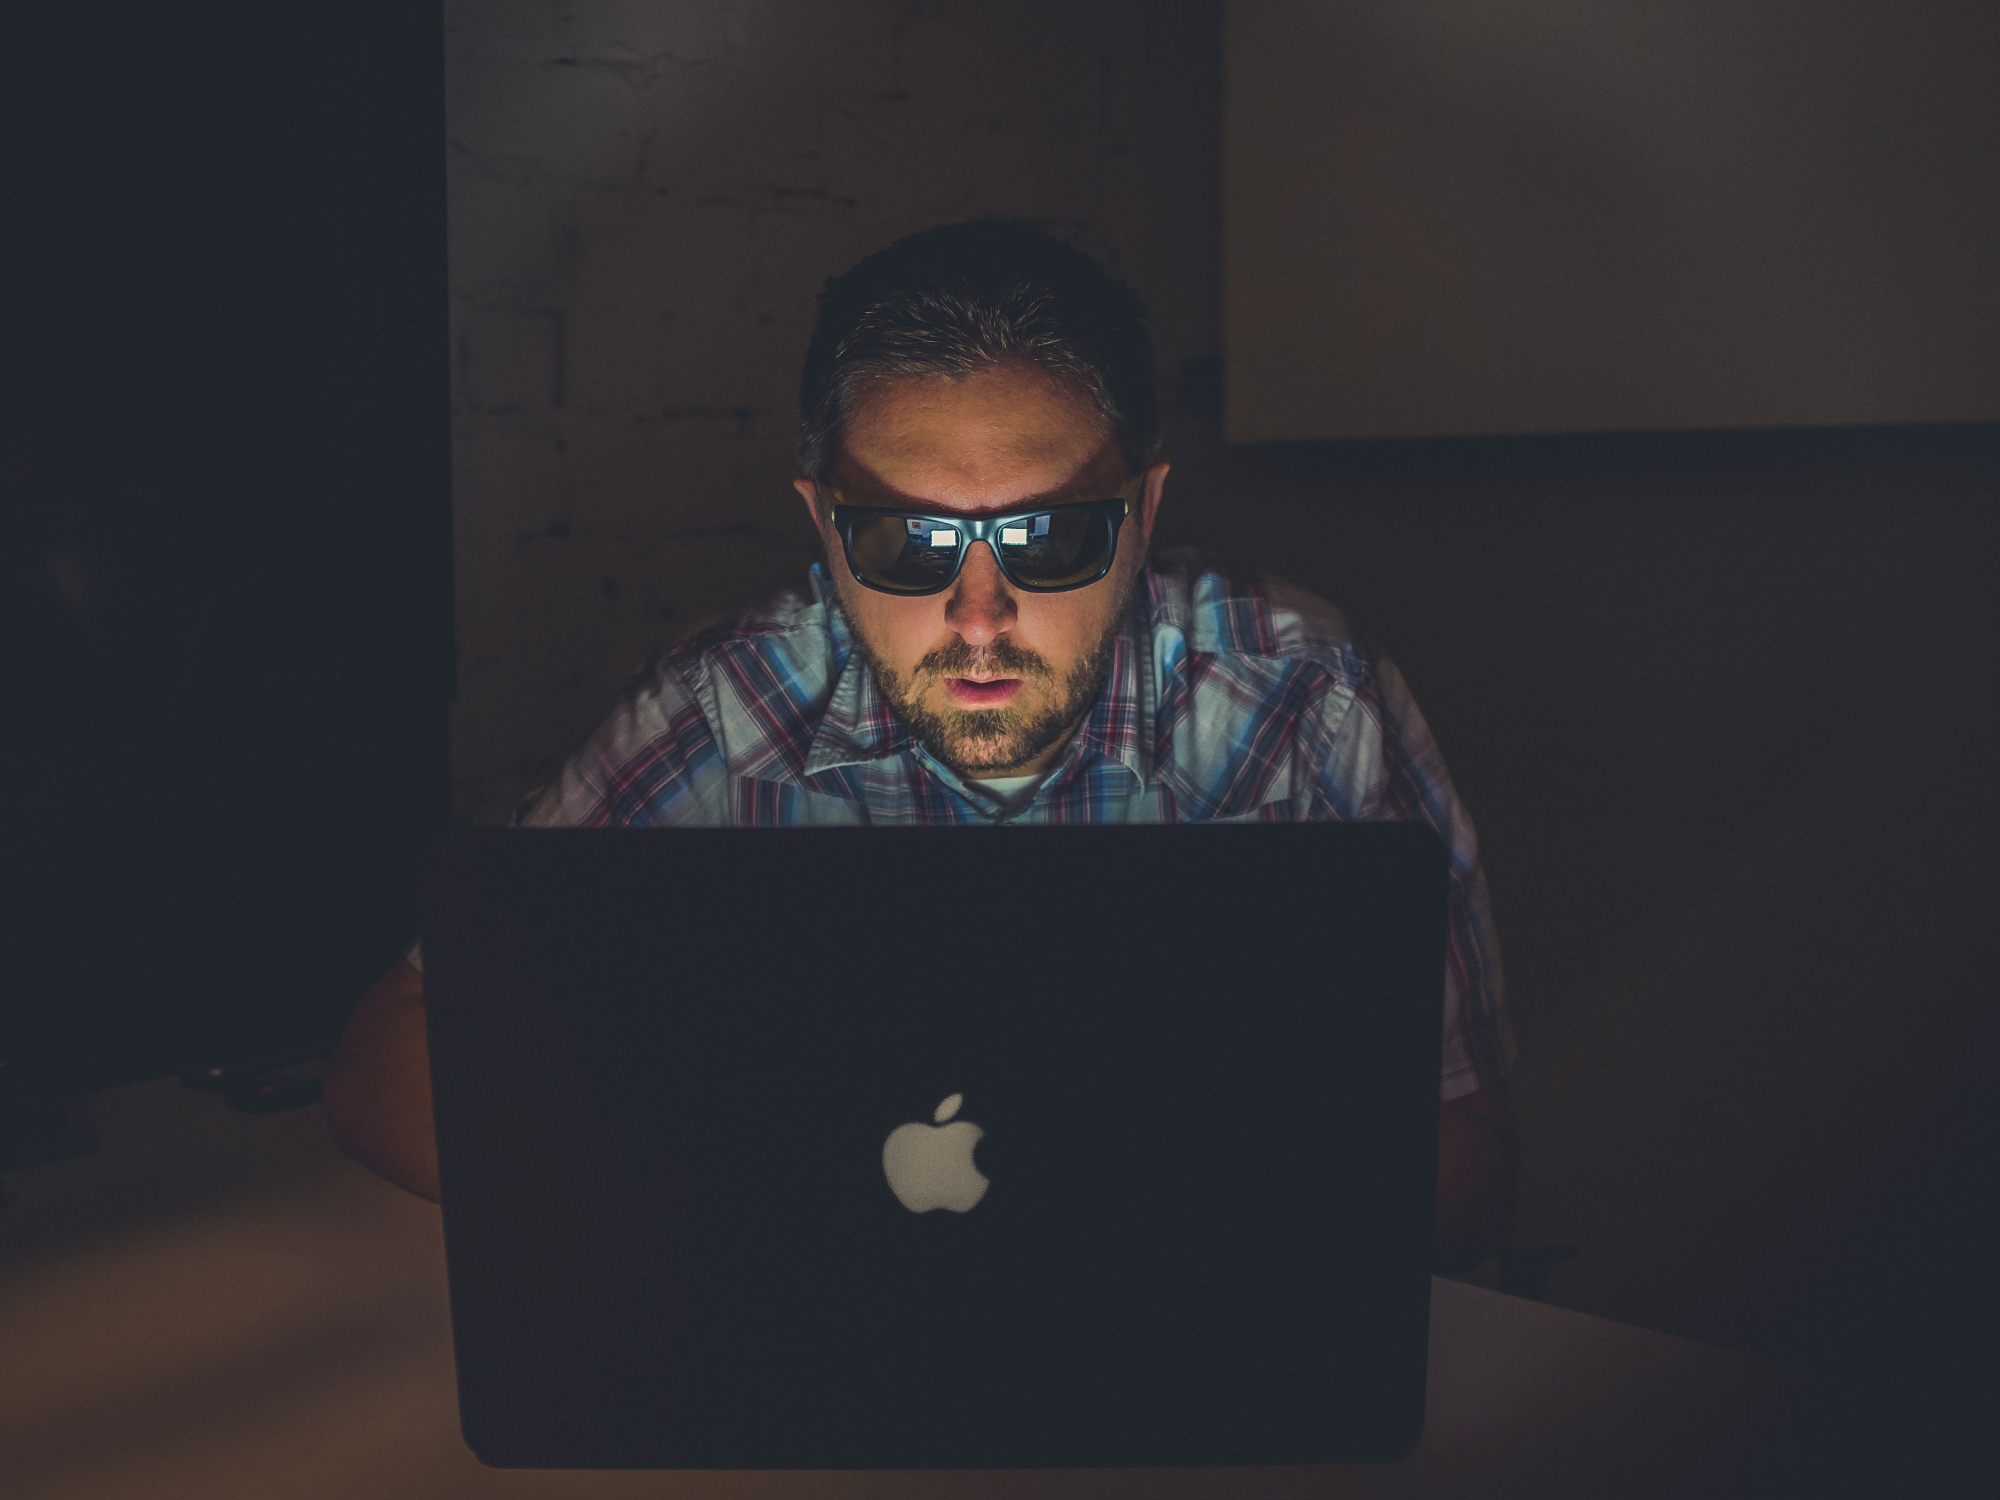 A man wearing sunglasses and a blue plaid shirt sitting in a dark room using an Apple Macbook laptop.